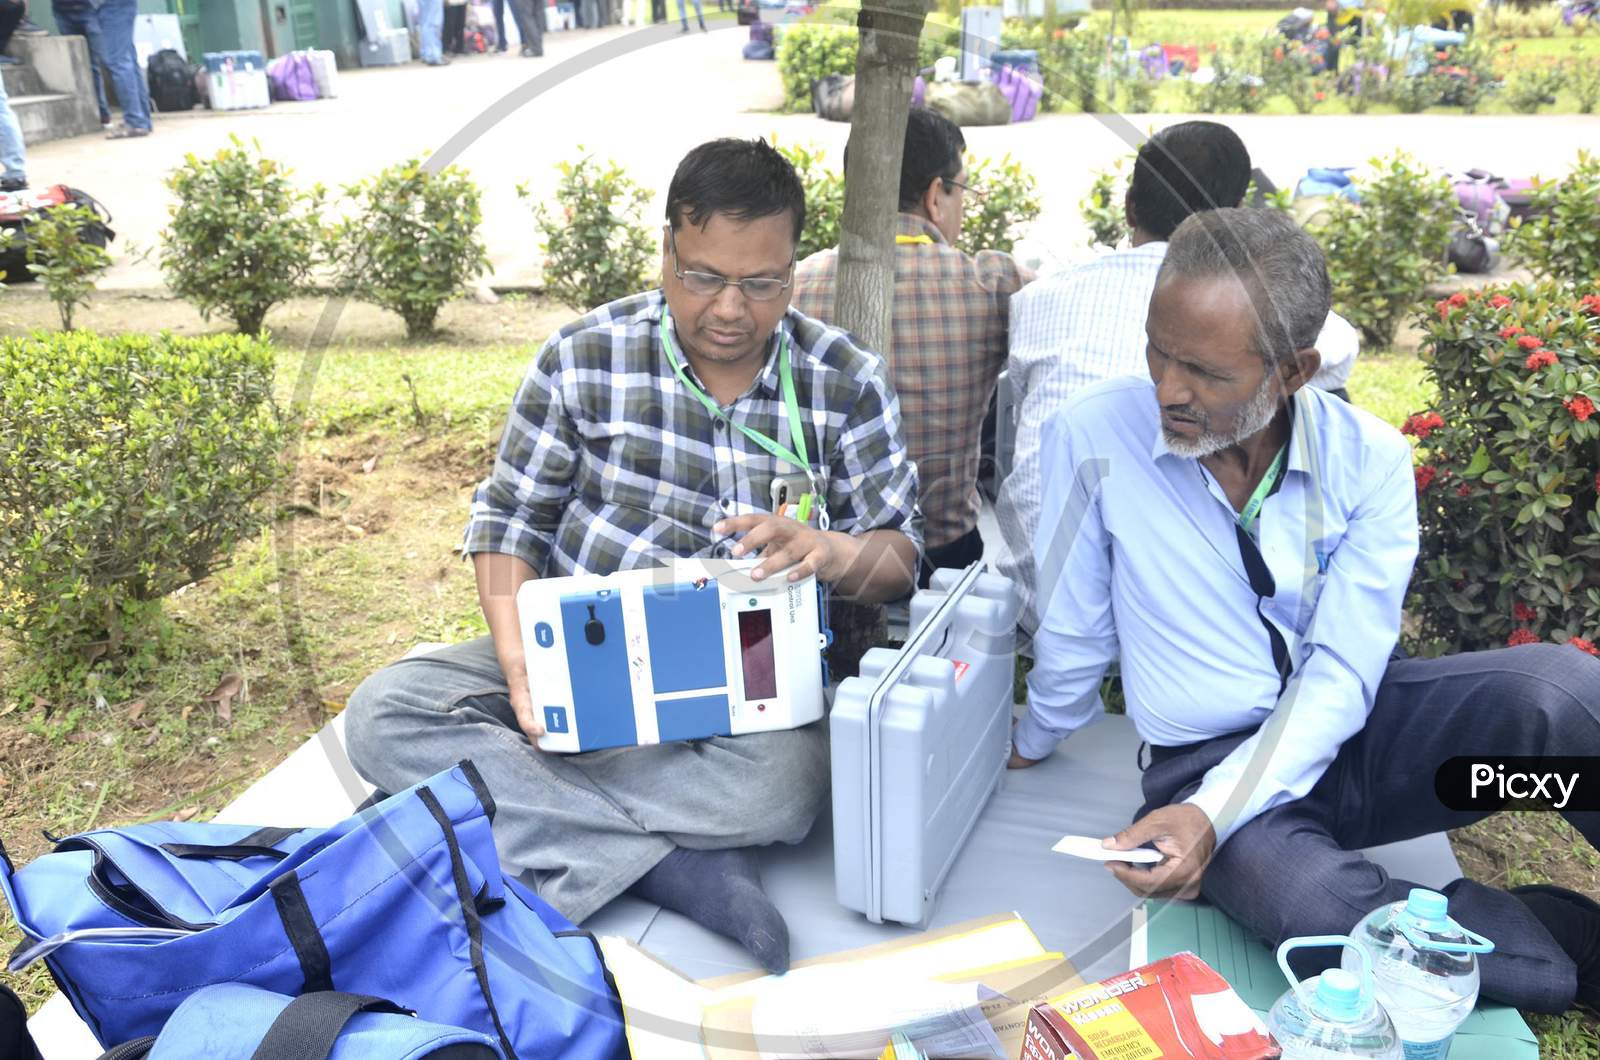 Polling officials check their EVMs and other election material